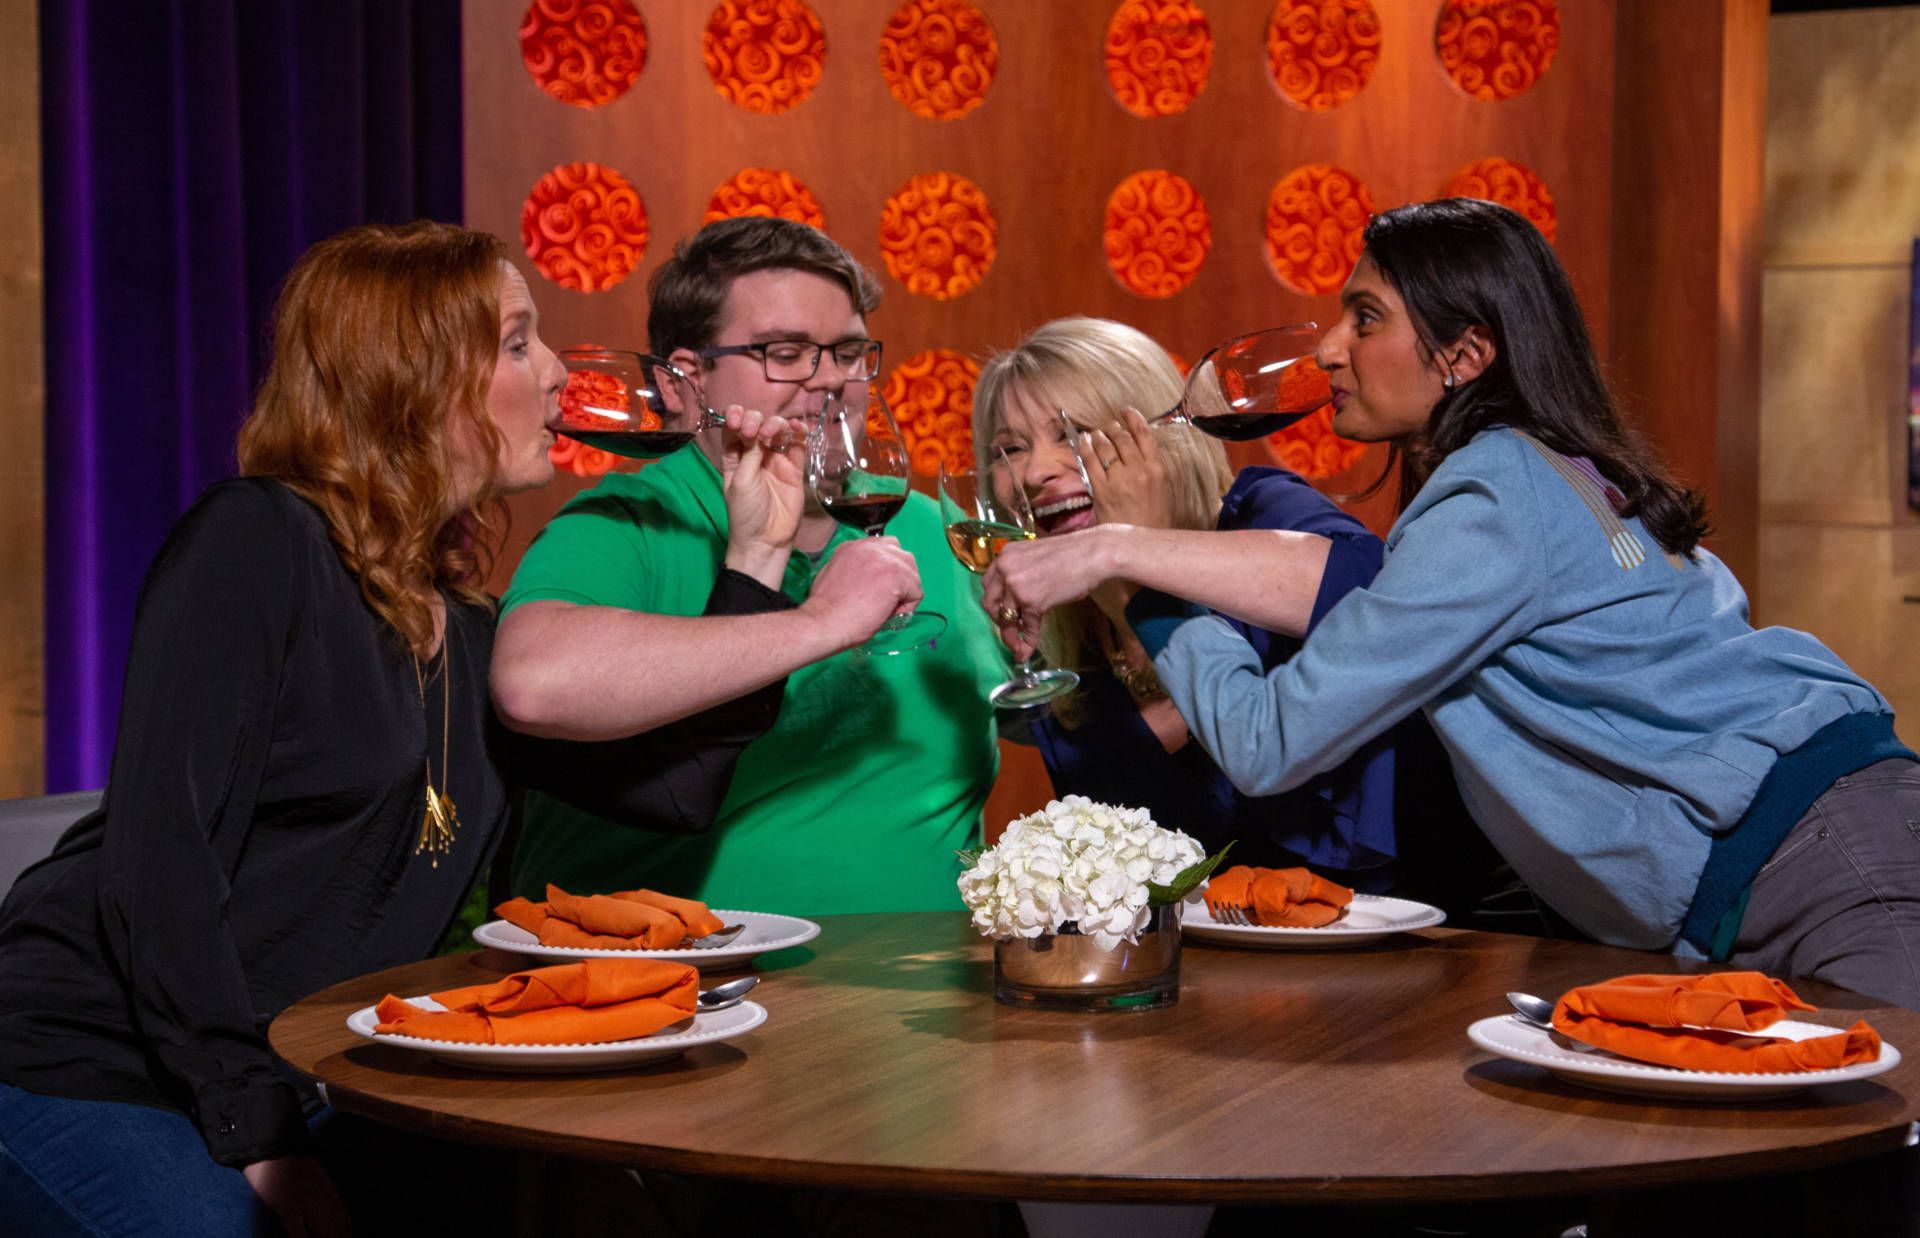 Host Leslie Sbrocco and guests on the set of season 14 episode 6.